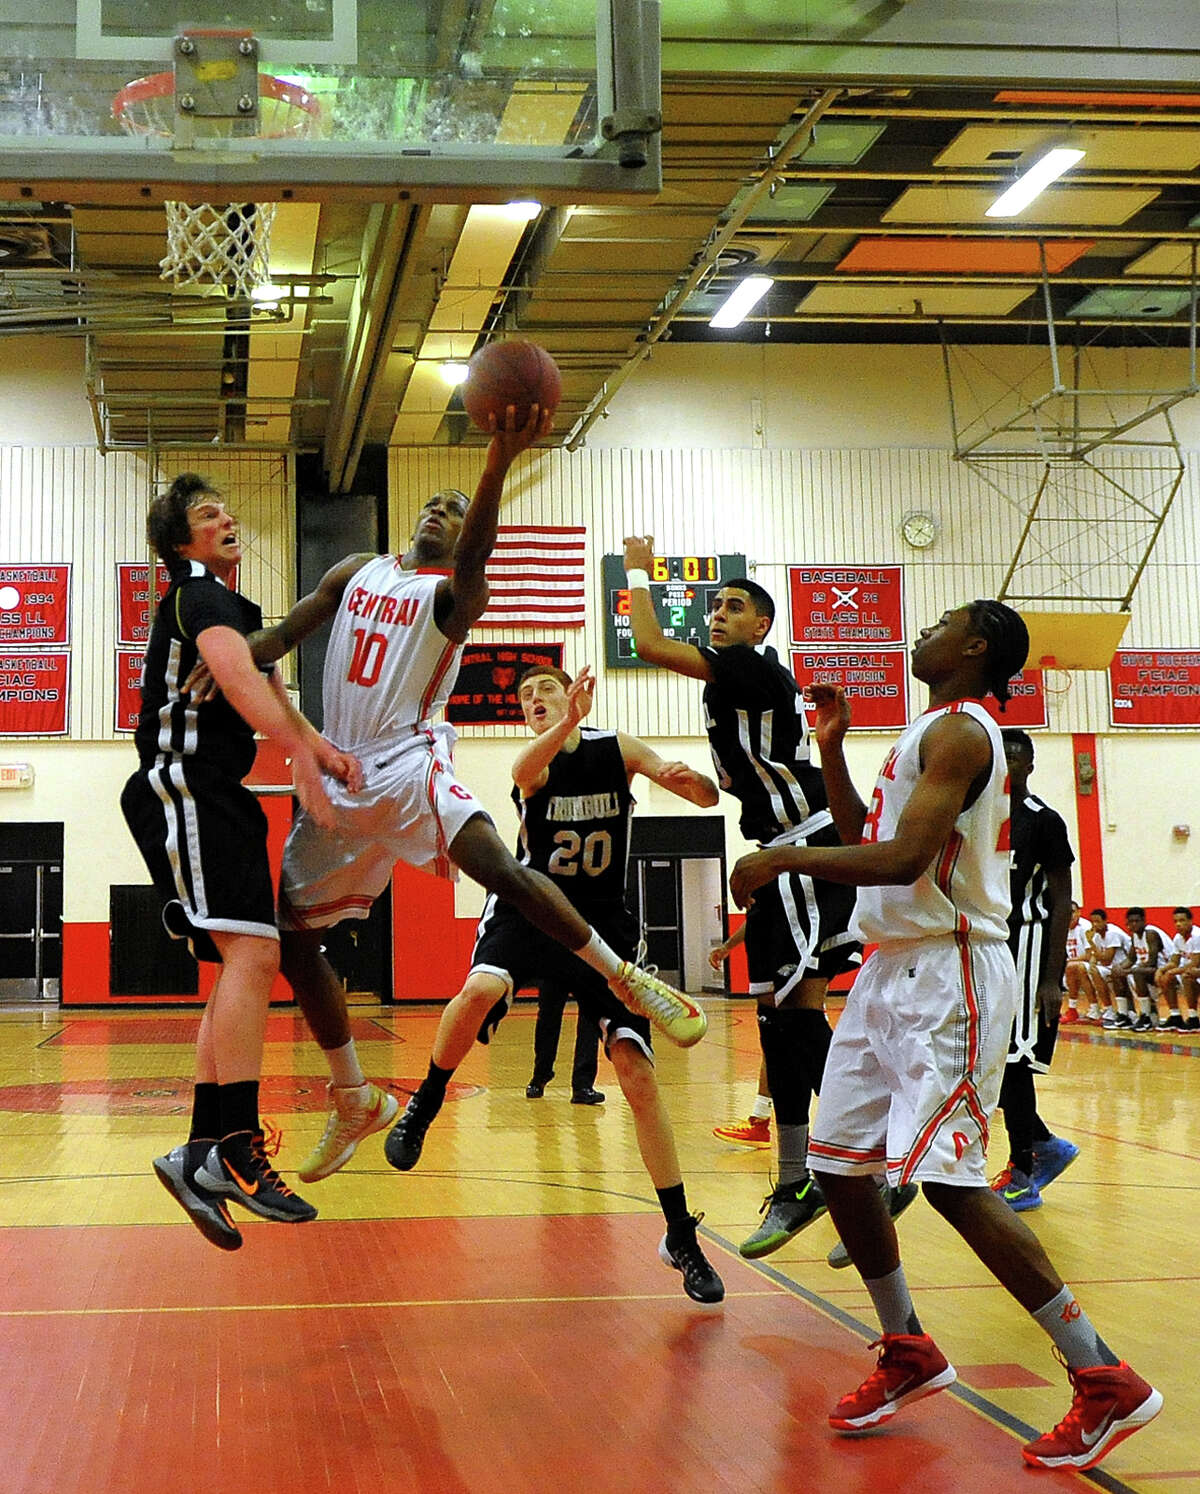 Central's Sha'quan Bretoux takes a shot up to the basket, during boys basketball action against Trumbull in Bridgeport, Conn. on Friday February 7, 2014. Defending at left is Trumbull's Ben McCullough.